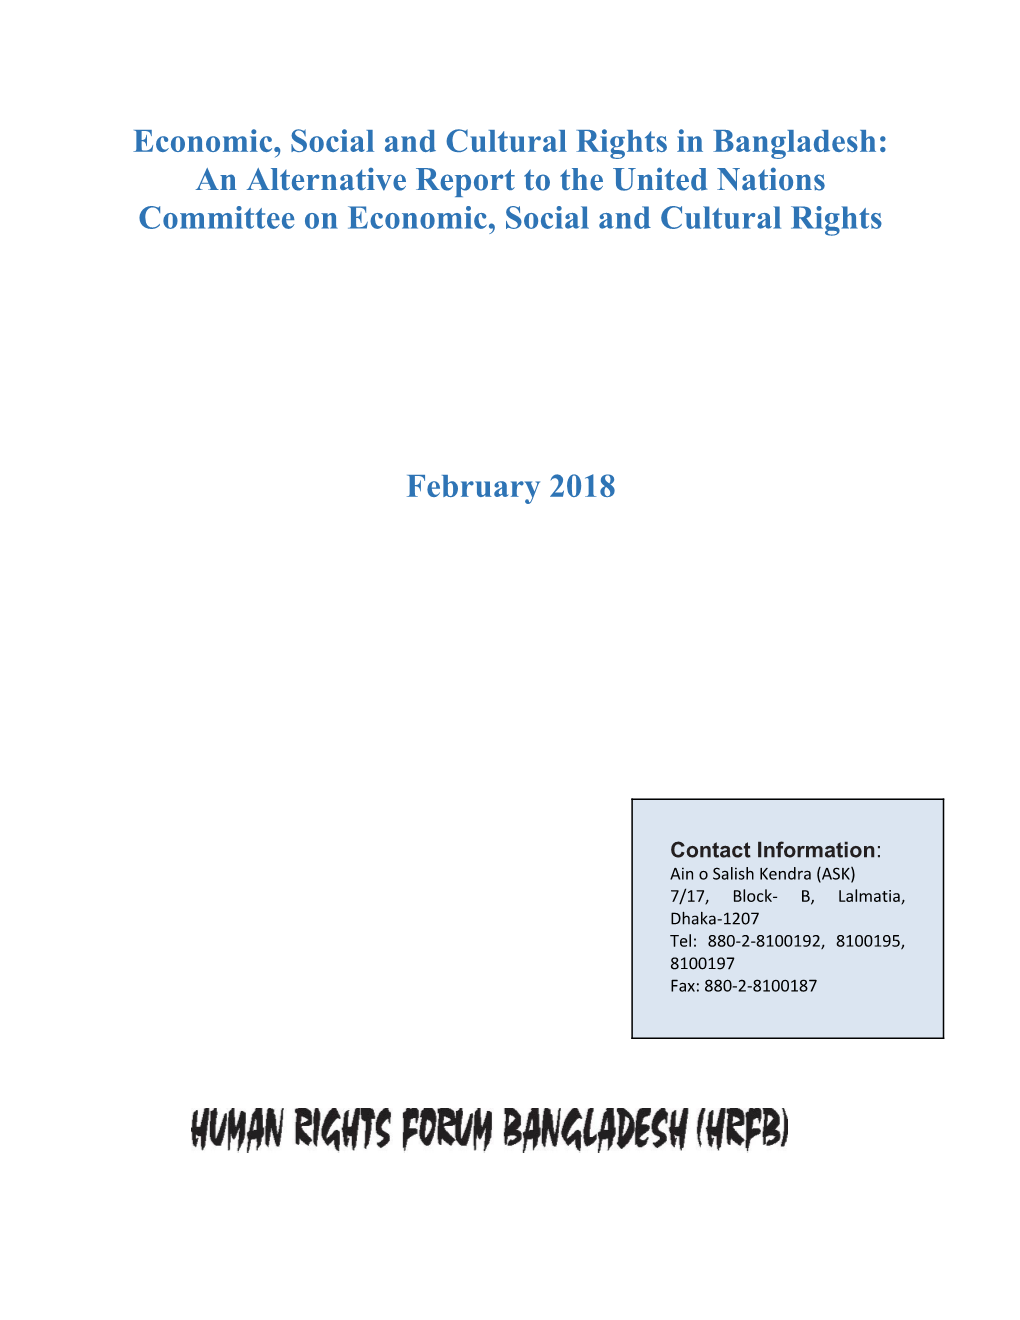 Economic, Social and Cultural Rights in Bangladesh: an Alternative Report to the United